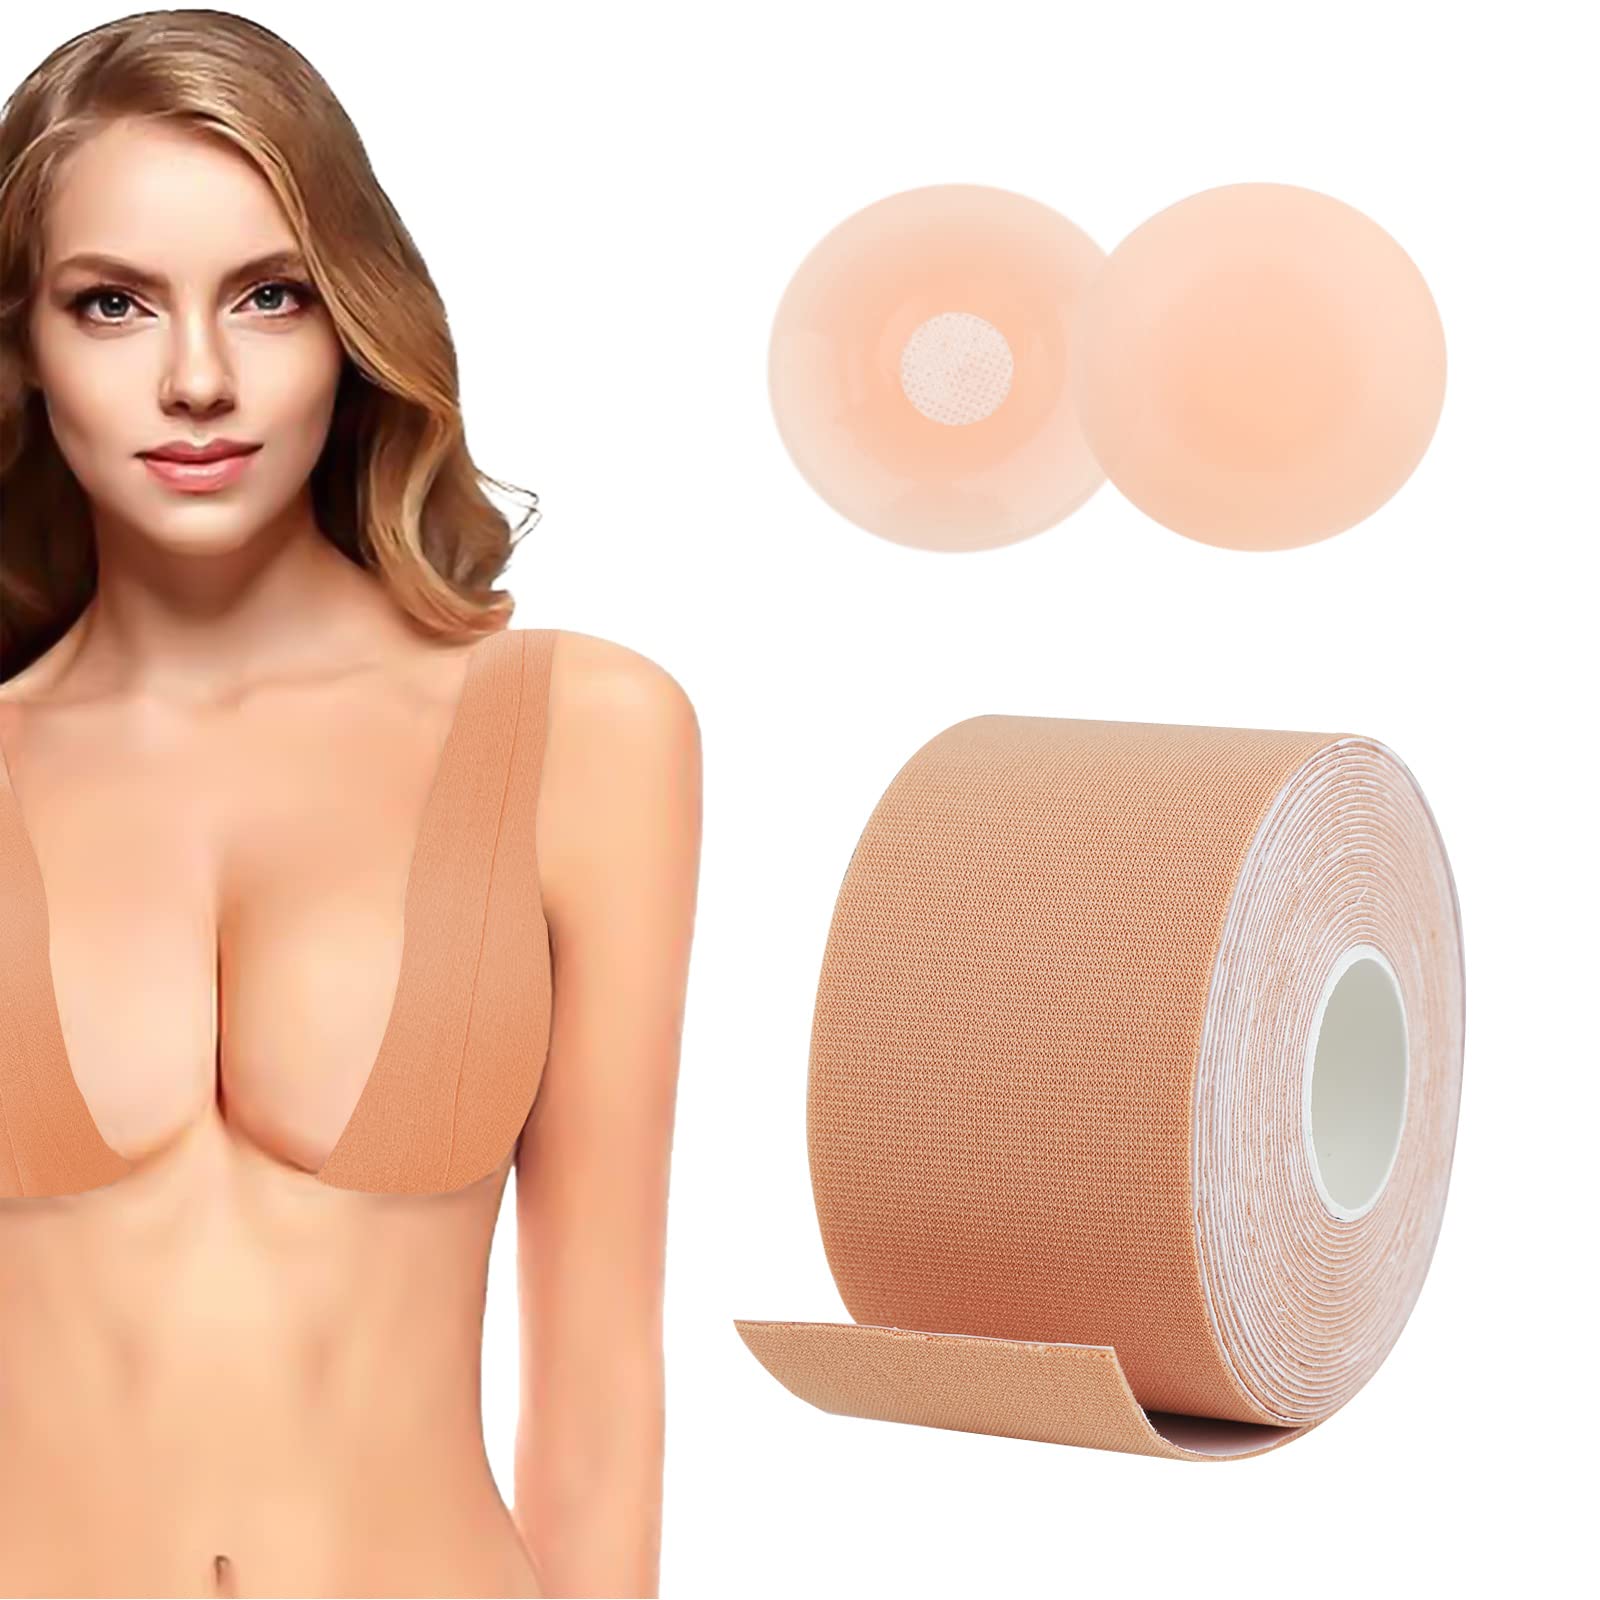 REFUN Boob Tape, Boobytape for Breast Lift with 2pcs Reusable